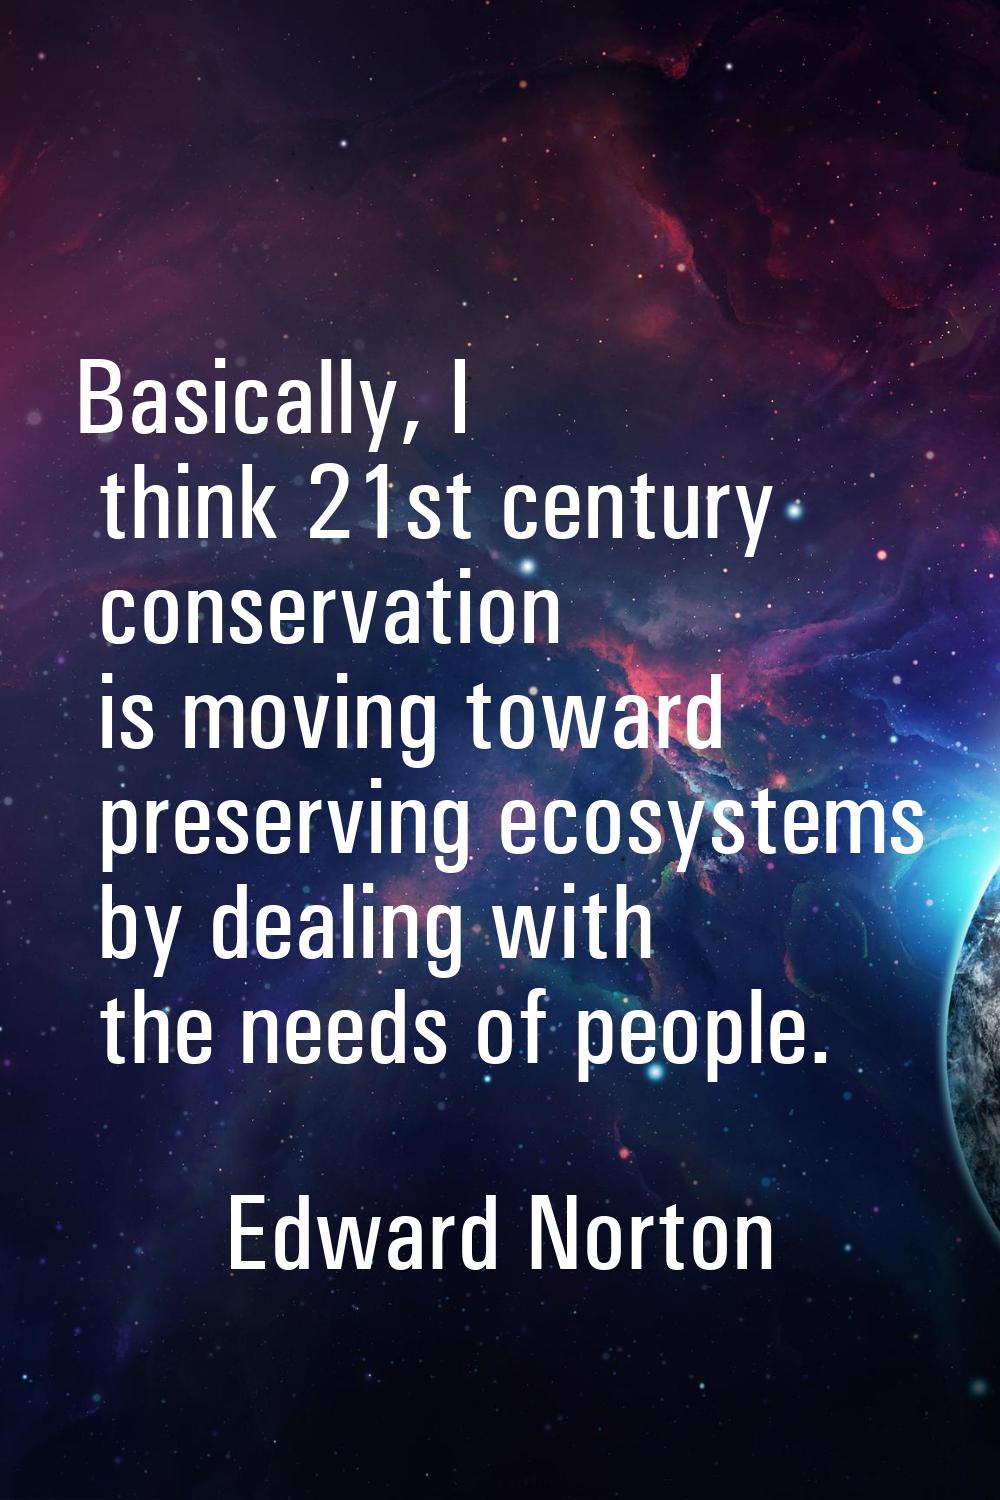 Basically, I think 21st century conservation is moving toward preserving ecosystems by dealing with